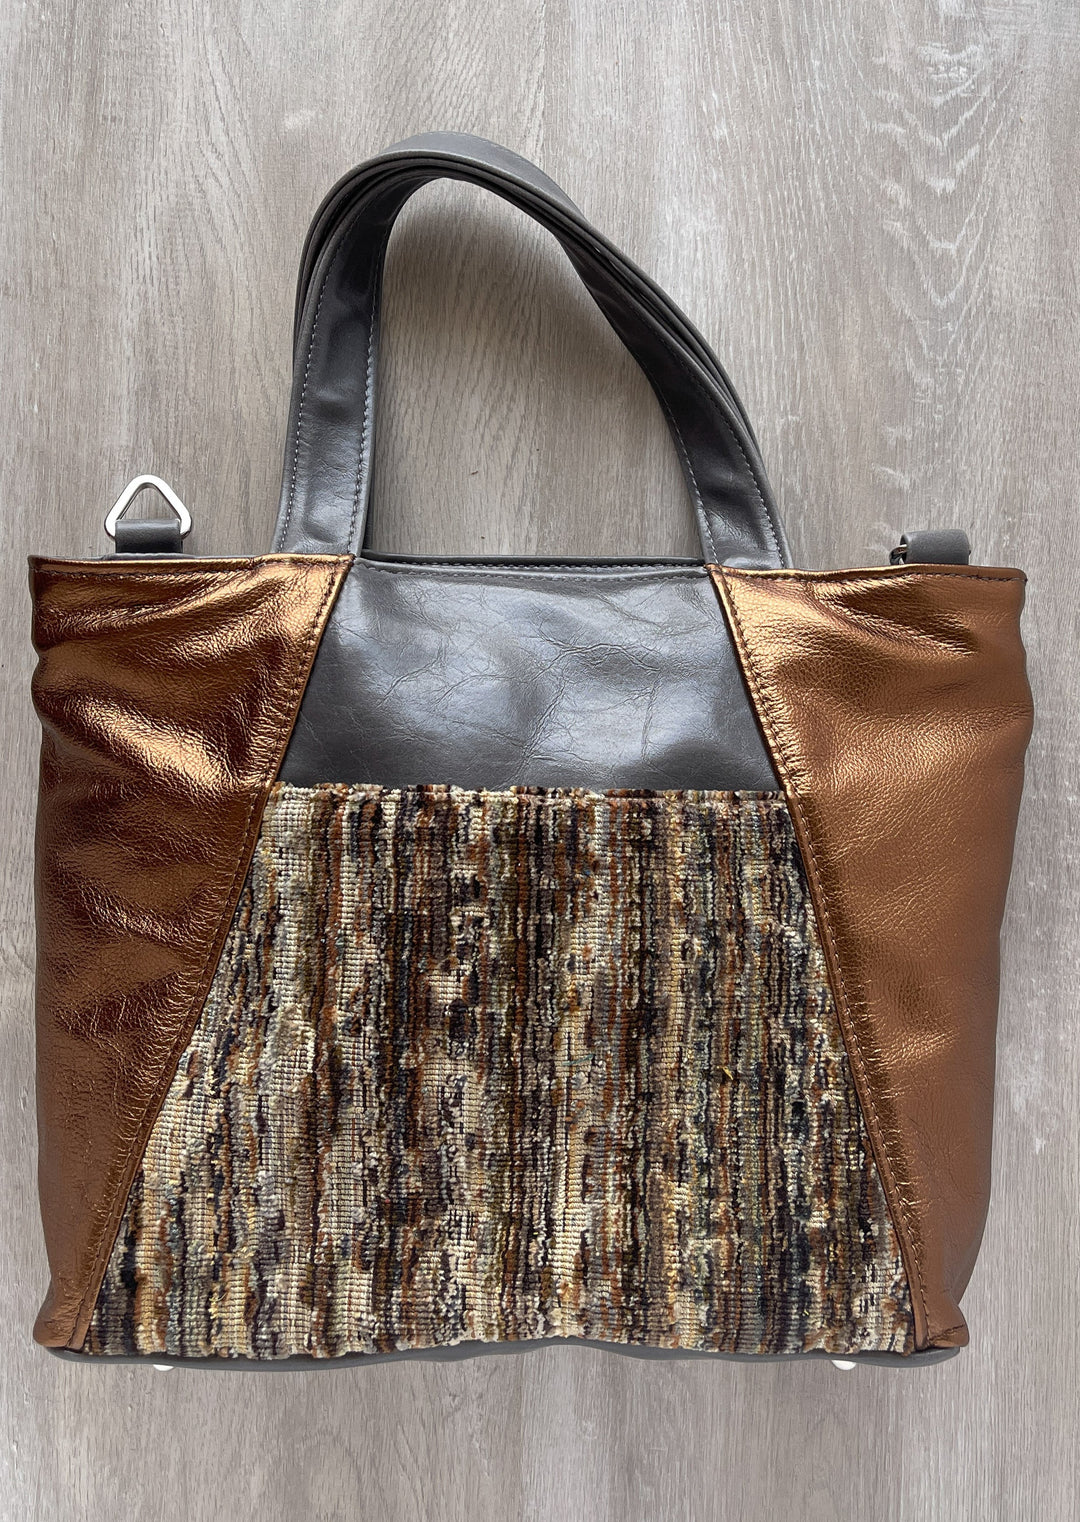 Mini Troubadour Tote - Grey with Bronze Leather and Brown Velvet